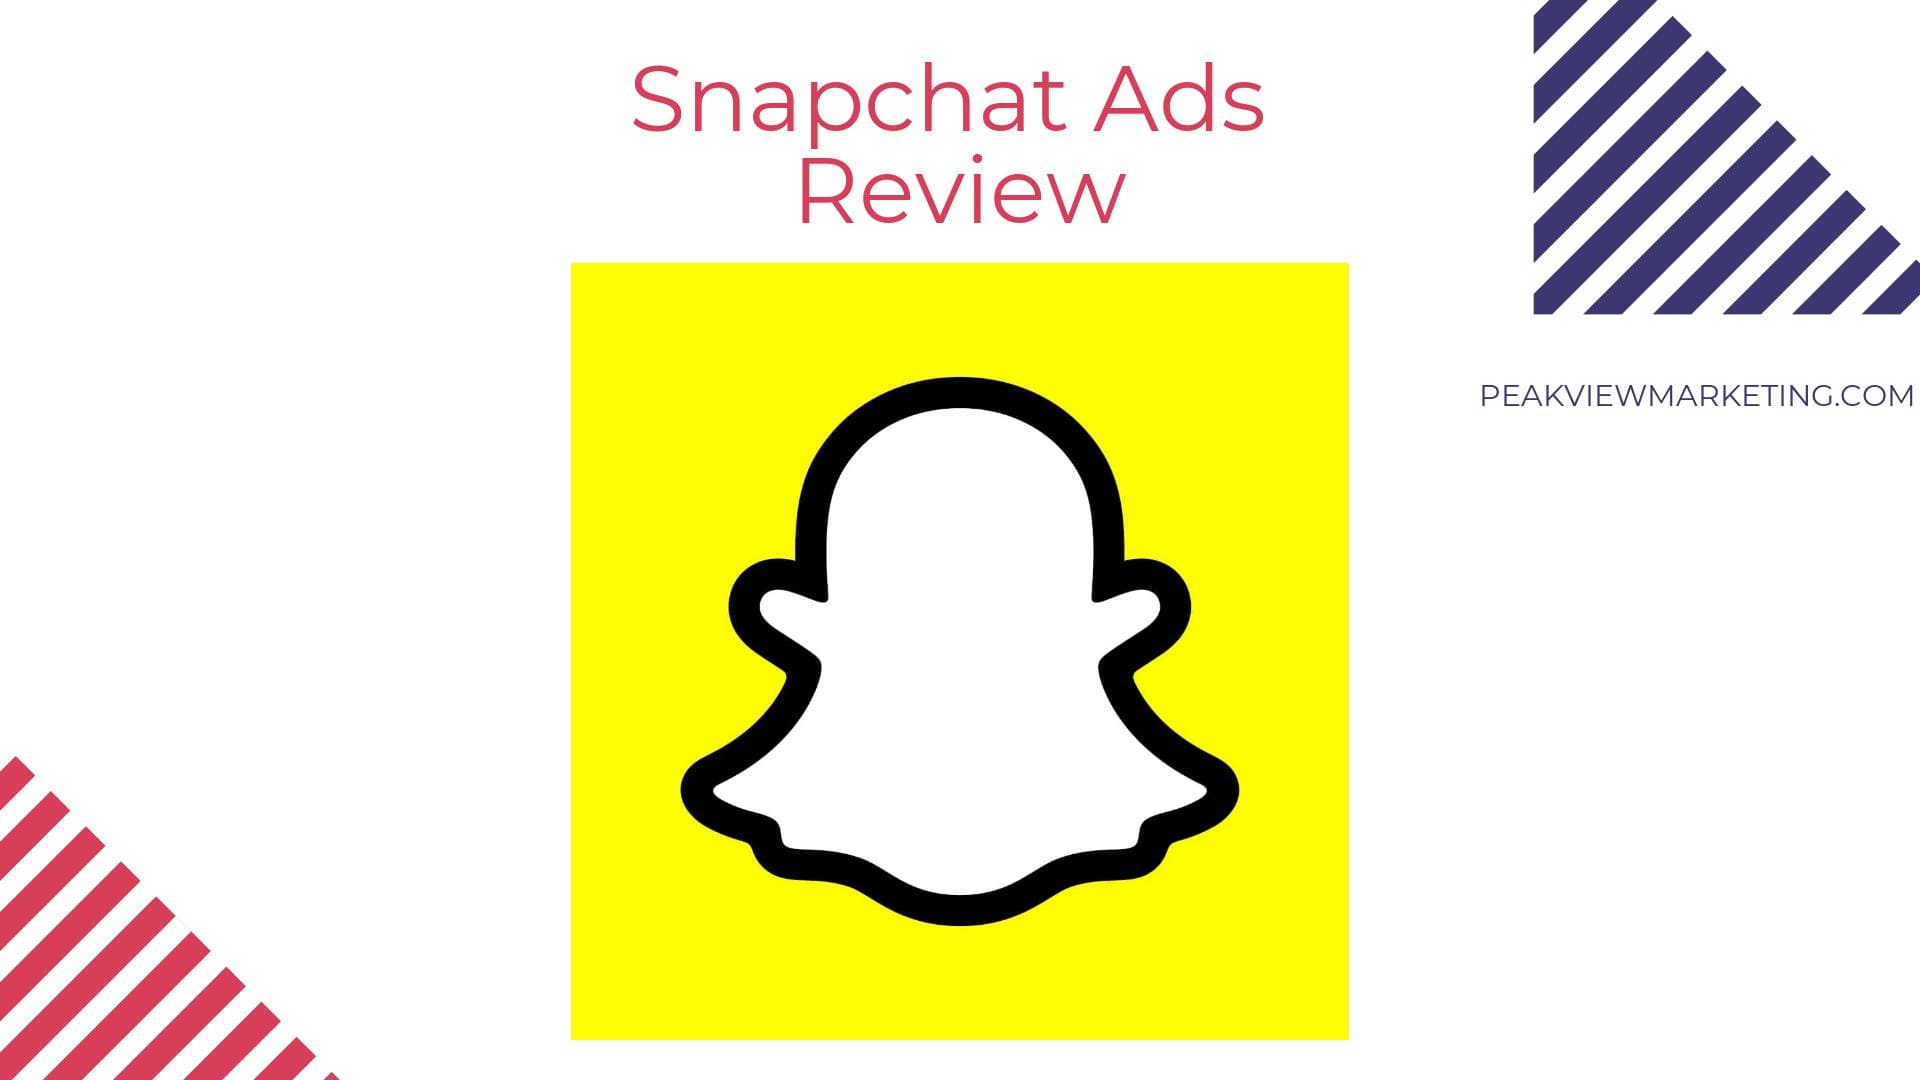 Snapchat Ads Review Image